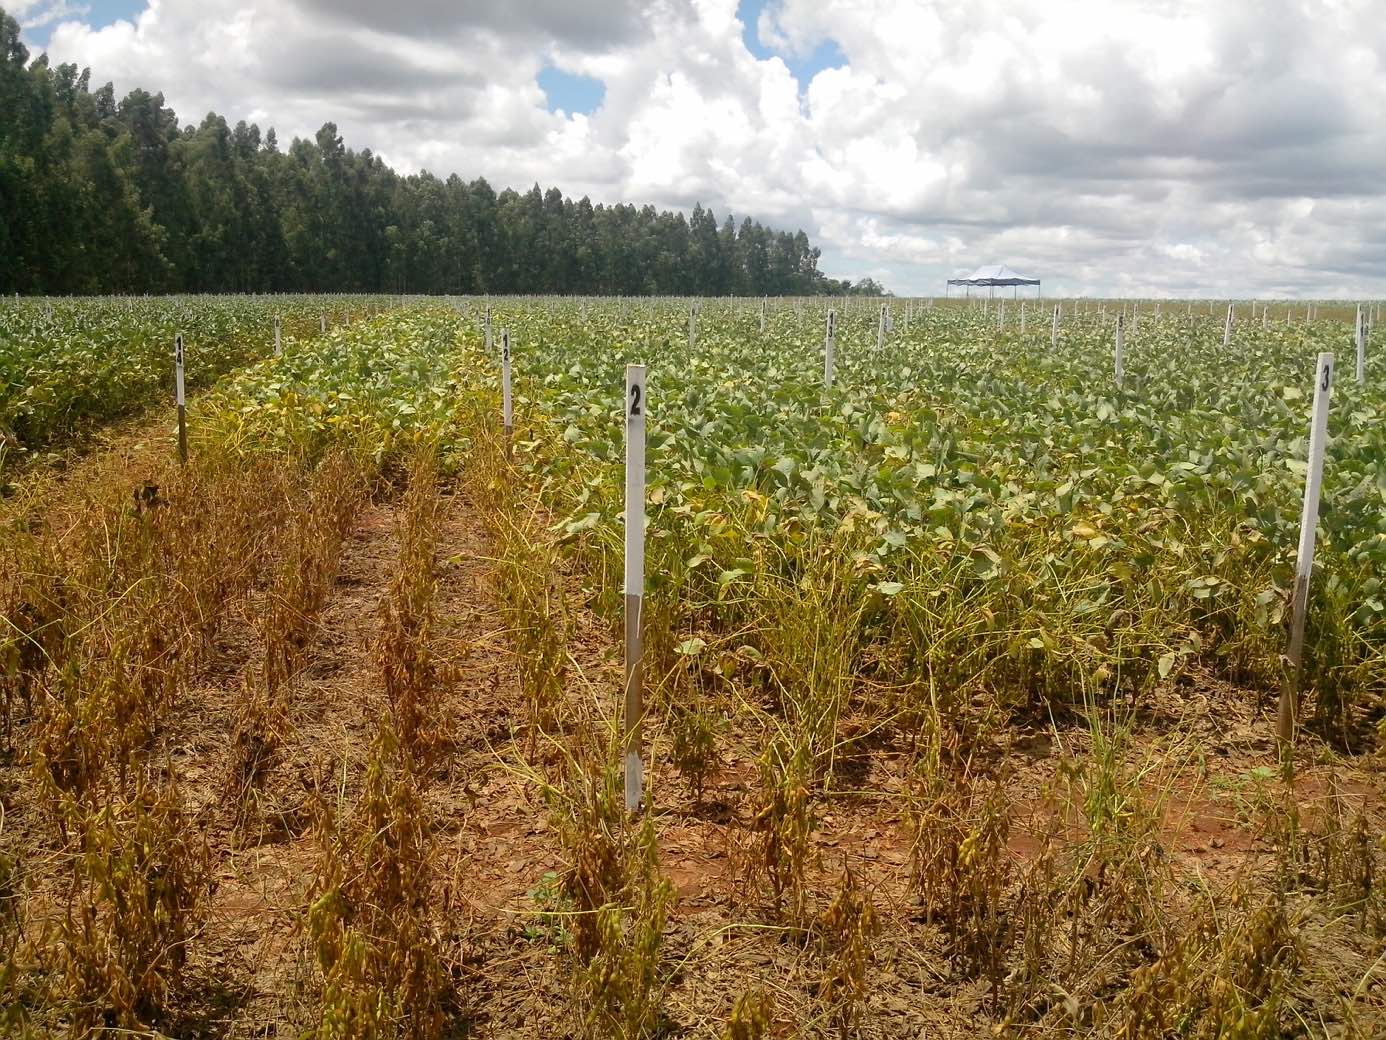  Fungicide field trial plots close to Dourados (Mato Grosso do Sul, Brazil). Untreated control plot in the foreground, with soybean plants showing a high level of infestation with Phakopsora pachyrhizi (Picture by S. Lamprecht, Bayer Division Crop Science). 